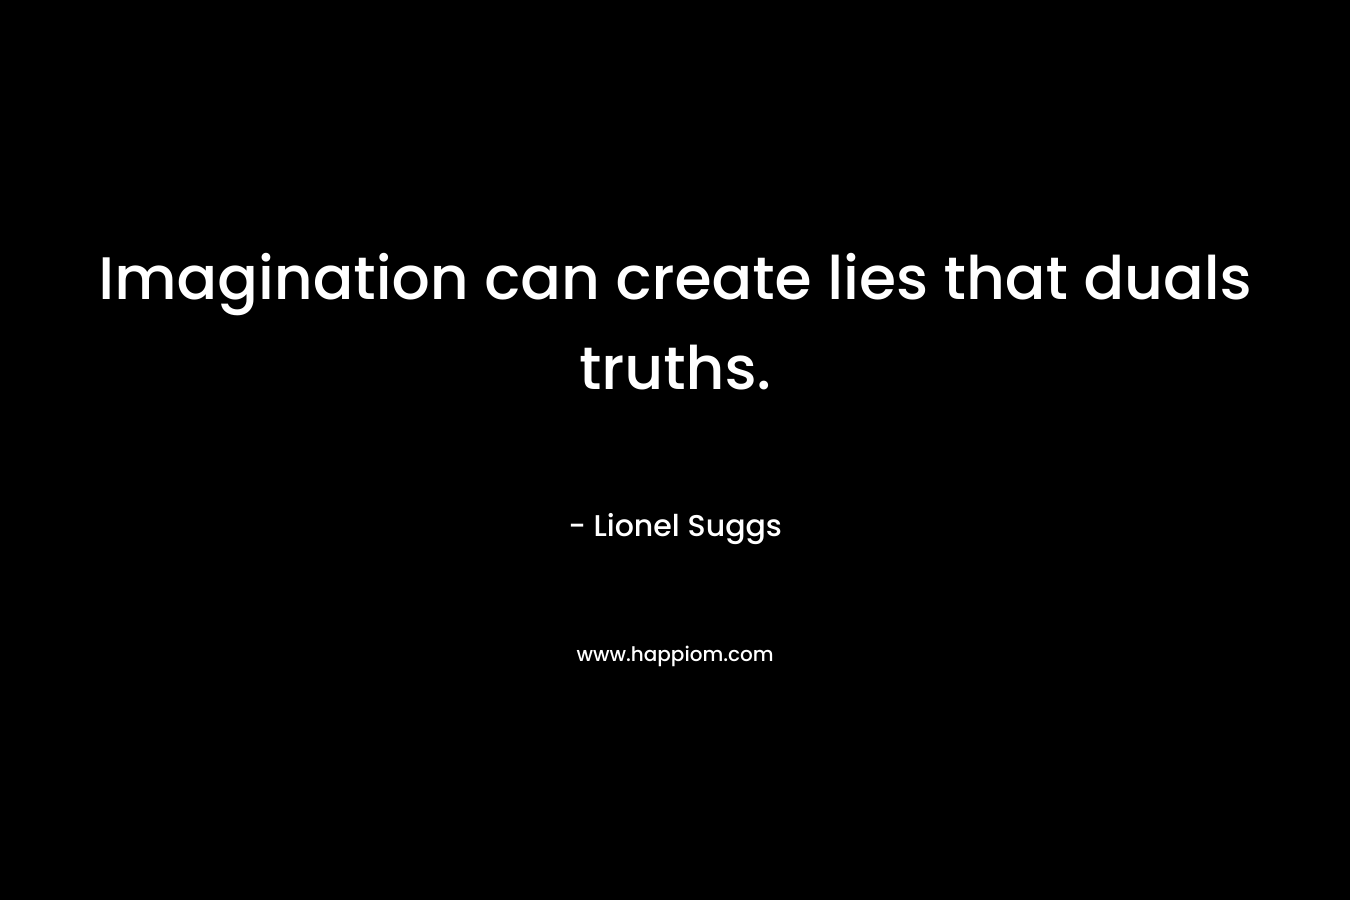 Imagination can create lies that duals truths. – Lionel Suggs